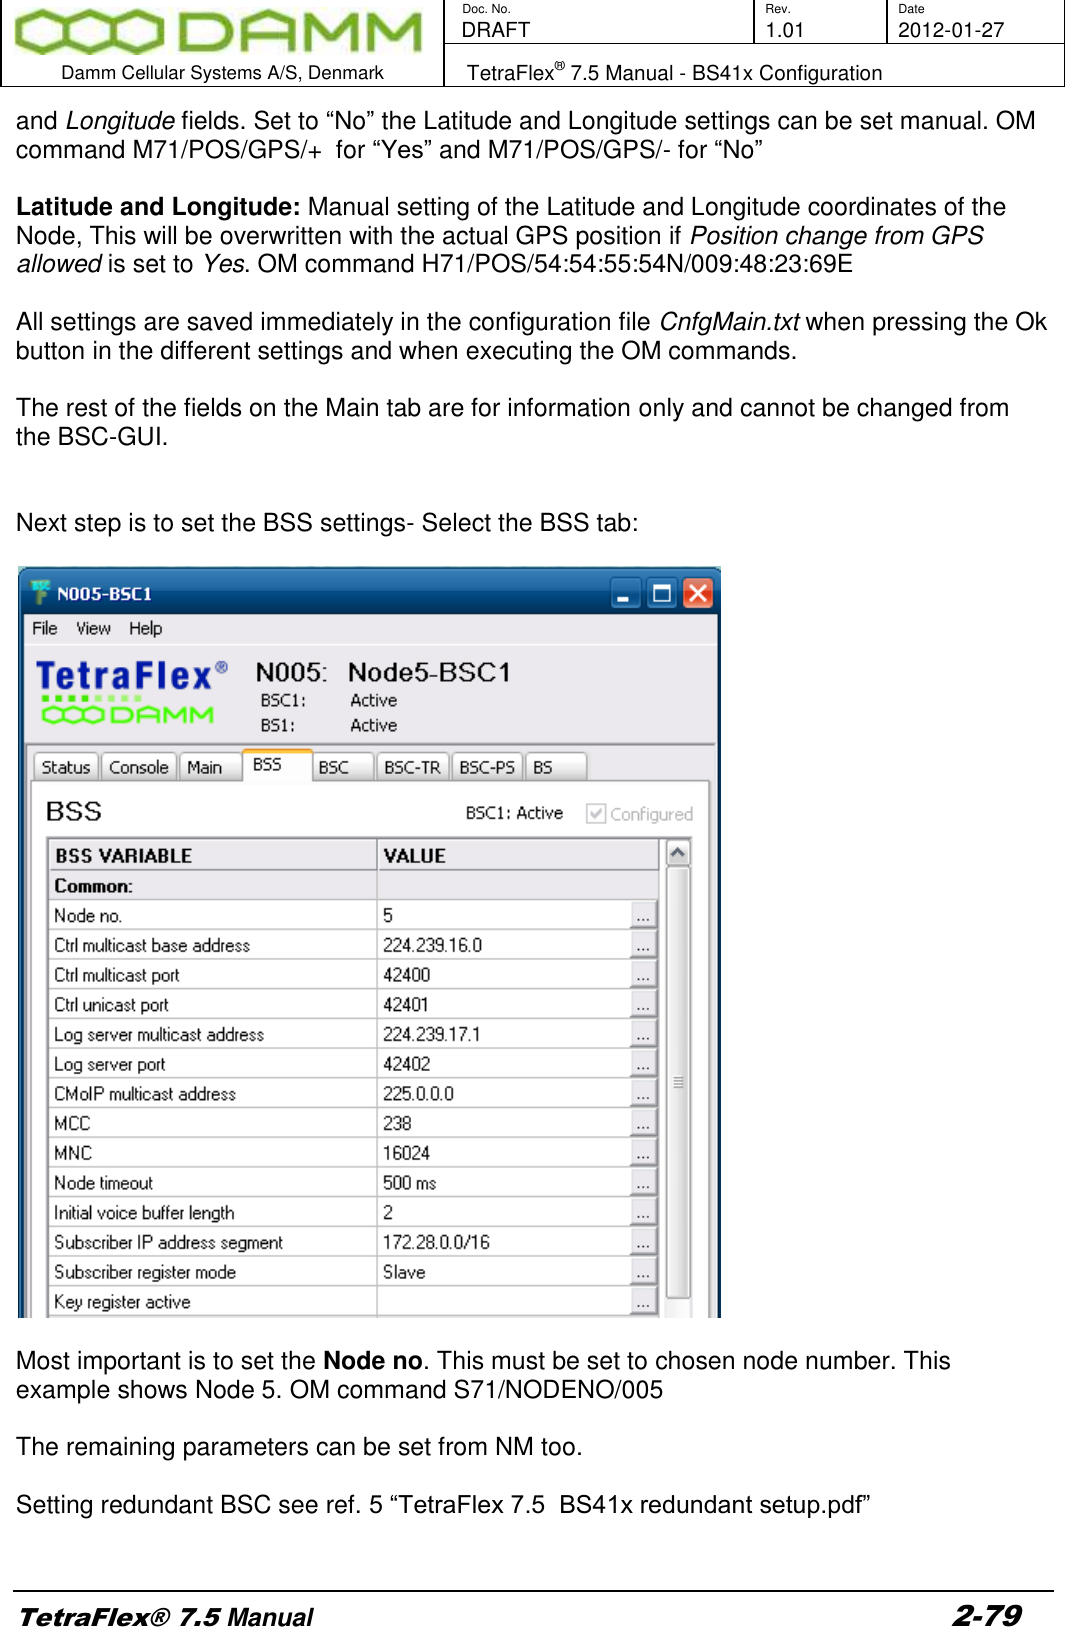        Doc. No. Rev. Date    DRAFT  1.01 2012-01-27  Damm Cellular Systems A/S, Denmark   TetraFlex® 7.5 Manual - BS41x Configuration  TetraFlex® 7.5 Manual 2-79 and Longitude fields. Set to “No” the Latitude and Longitude settings can be set manual. OM command M71/POS/GPS/+  for “Yes” and M71/POS/GPS/- for “No”  Latitude and Longitude: Manual setting of the Latitude and Longitude coordinates of the Node, This will be overwritten with the actual GPS position if Position change from GPS allowed is set to Yes. OM command H71/POS/54:54:55:54N/009:48:23:69E  All settings are saved immediately in the configuration file CnfgMain.txt when pressing the Ok button in the different settings and when executing the OM commands.   The rest of the fields on the Main tab are for information only and cannot be changed from the BSC-GUI.   Next step is to set the BSS settings- Select the BSS tab:     Most important is to set the Node no. This must be set to chosen node number. This example shows Node 5. OM command S71/NODENO/005  The remaining parameters can be set from NM too.  Setting redundant BSC see ref. 5 “TetraFlex 7.5  BS41x redundant setup.pdf”  